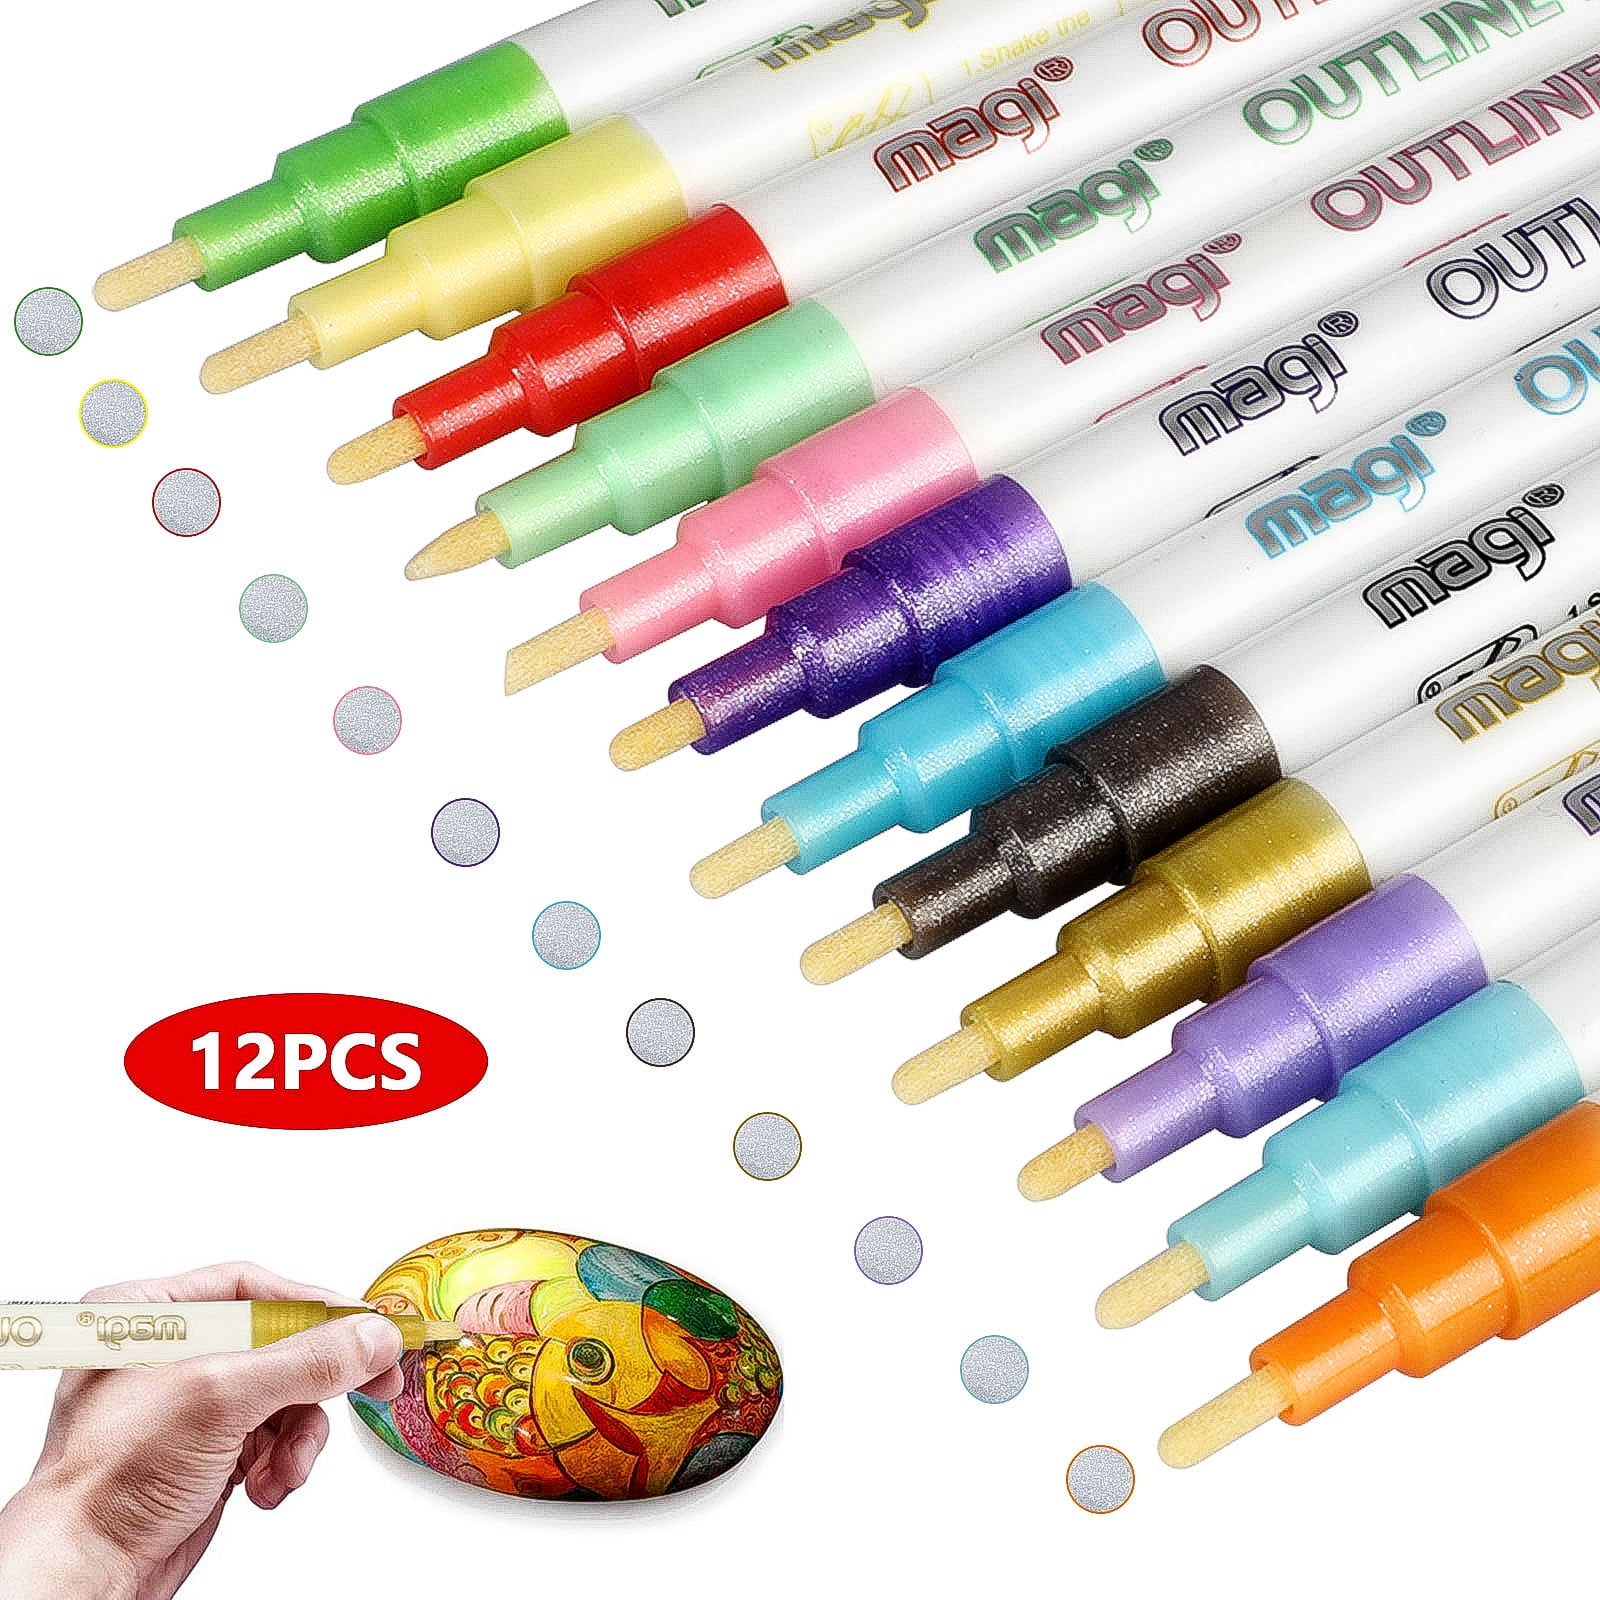 Plastic Wood Stone Glass Metallic Pens 24 Colors Dual Tip Glitter Pens Paint Pen Markers for Scrapbooking Adult Colouring DIY Photo Album Clothes and Pottery… Metal